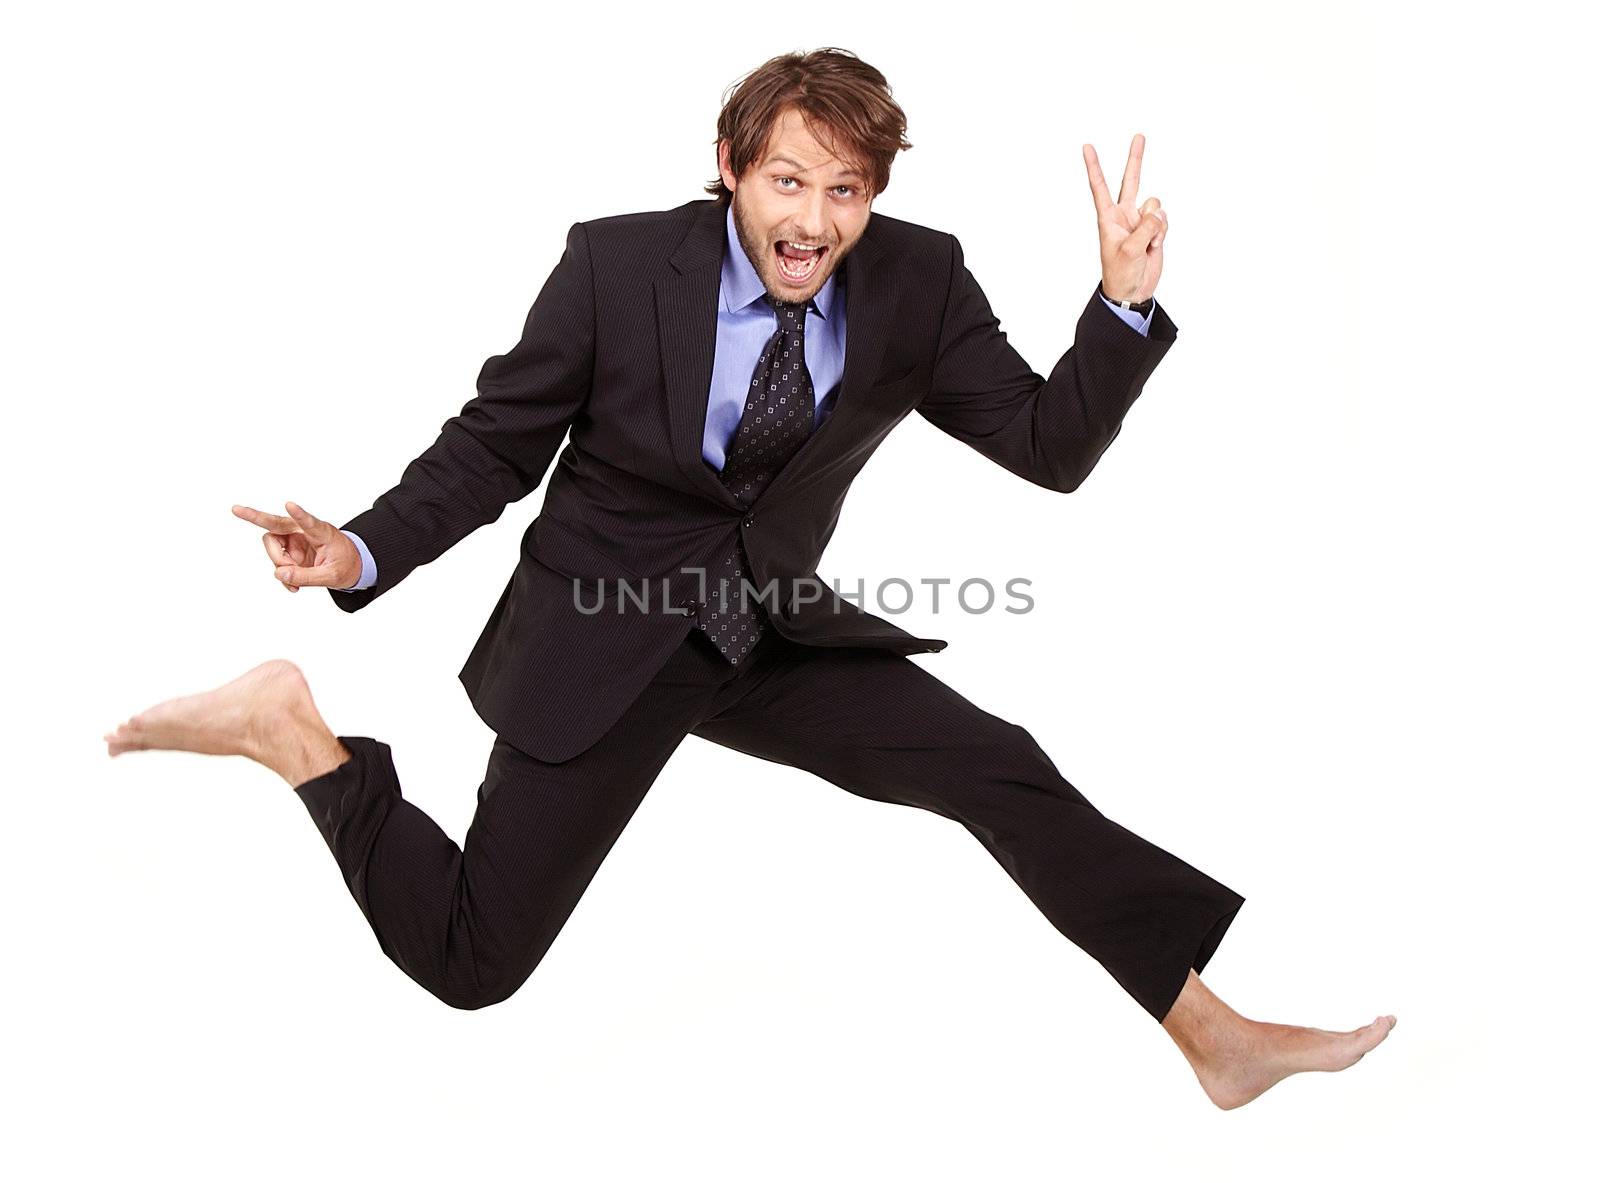 crazy dude in a suit, is jumping barefoot and making v-sign